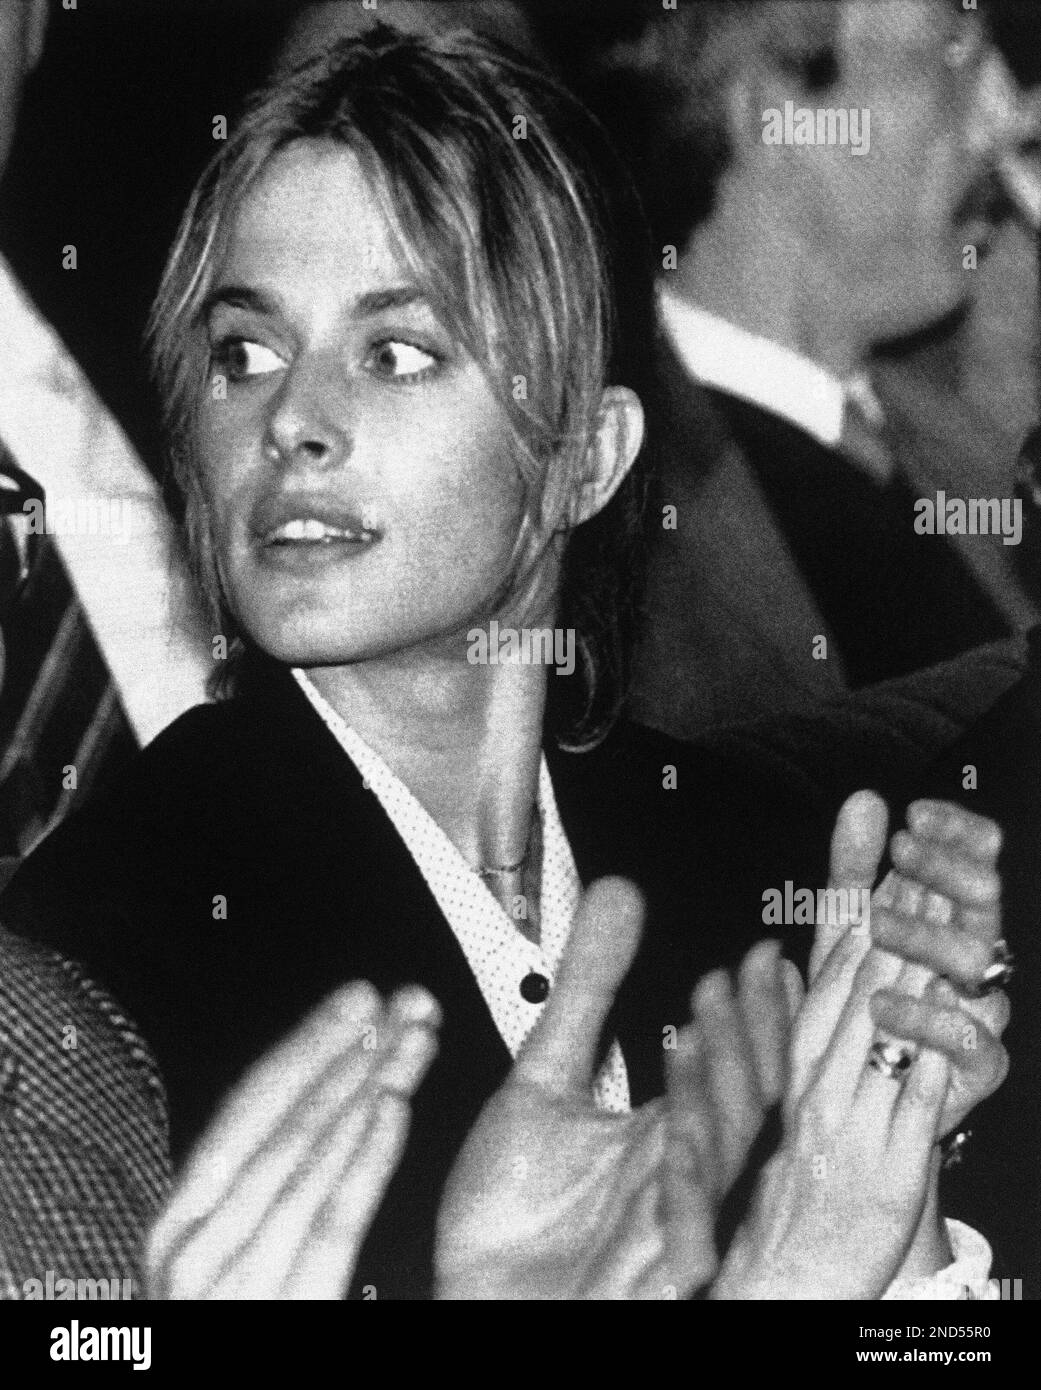 Nastassja Kinski attends ceremonies ending the 11th annual Cairo international Film Festival, Dec. 12, 1987. Ms. Kinski, star of such movies as "Tess" and "Paris Texas" was in Cairo with her Egyptian husband, Ibrahim Moussa, producer of Federico Fellini's movie "Intervista" a featured exhibit in the 11-day Festival. (AP Photo/Paola Crociani) Stock Photo